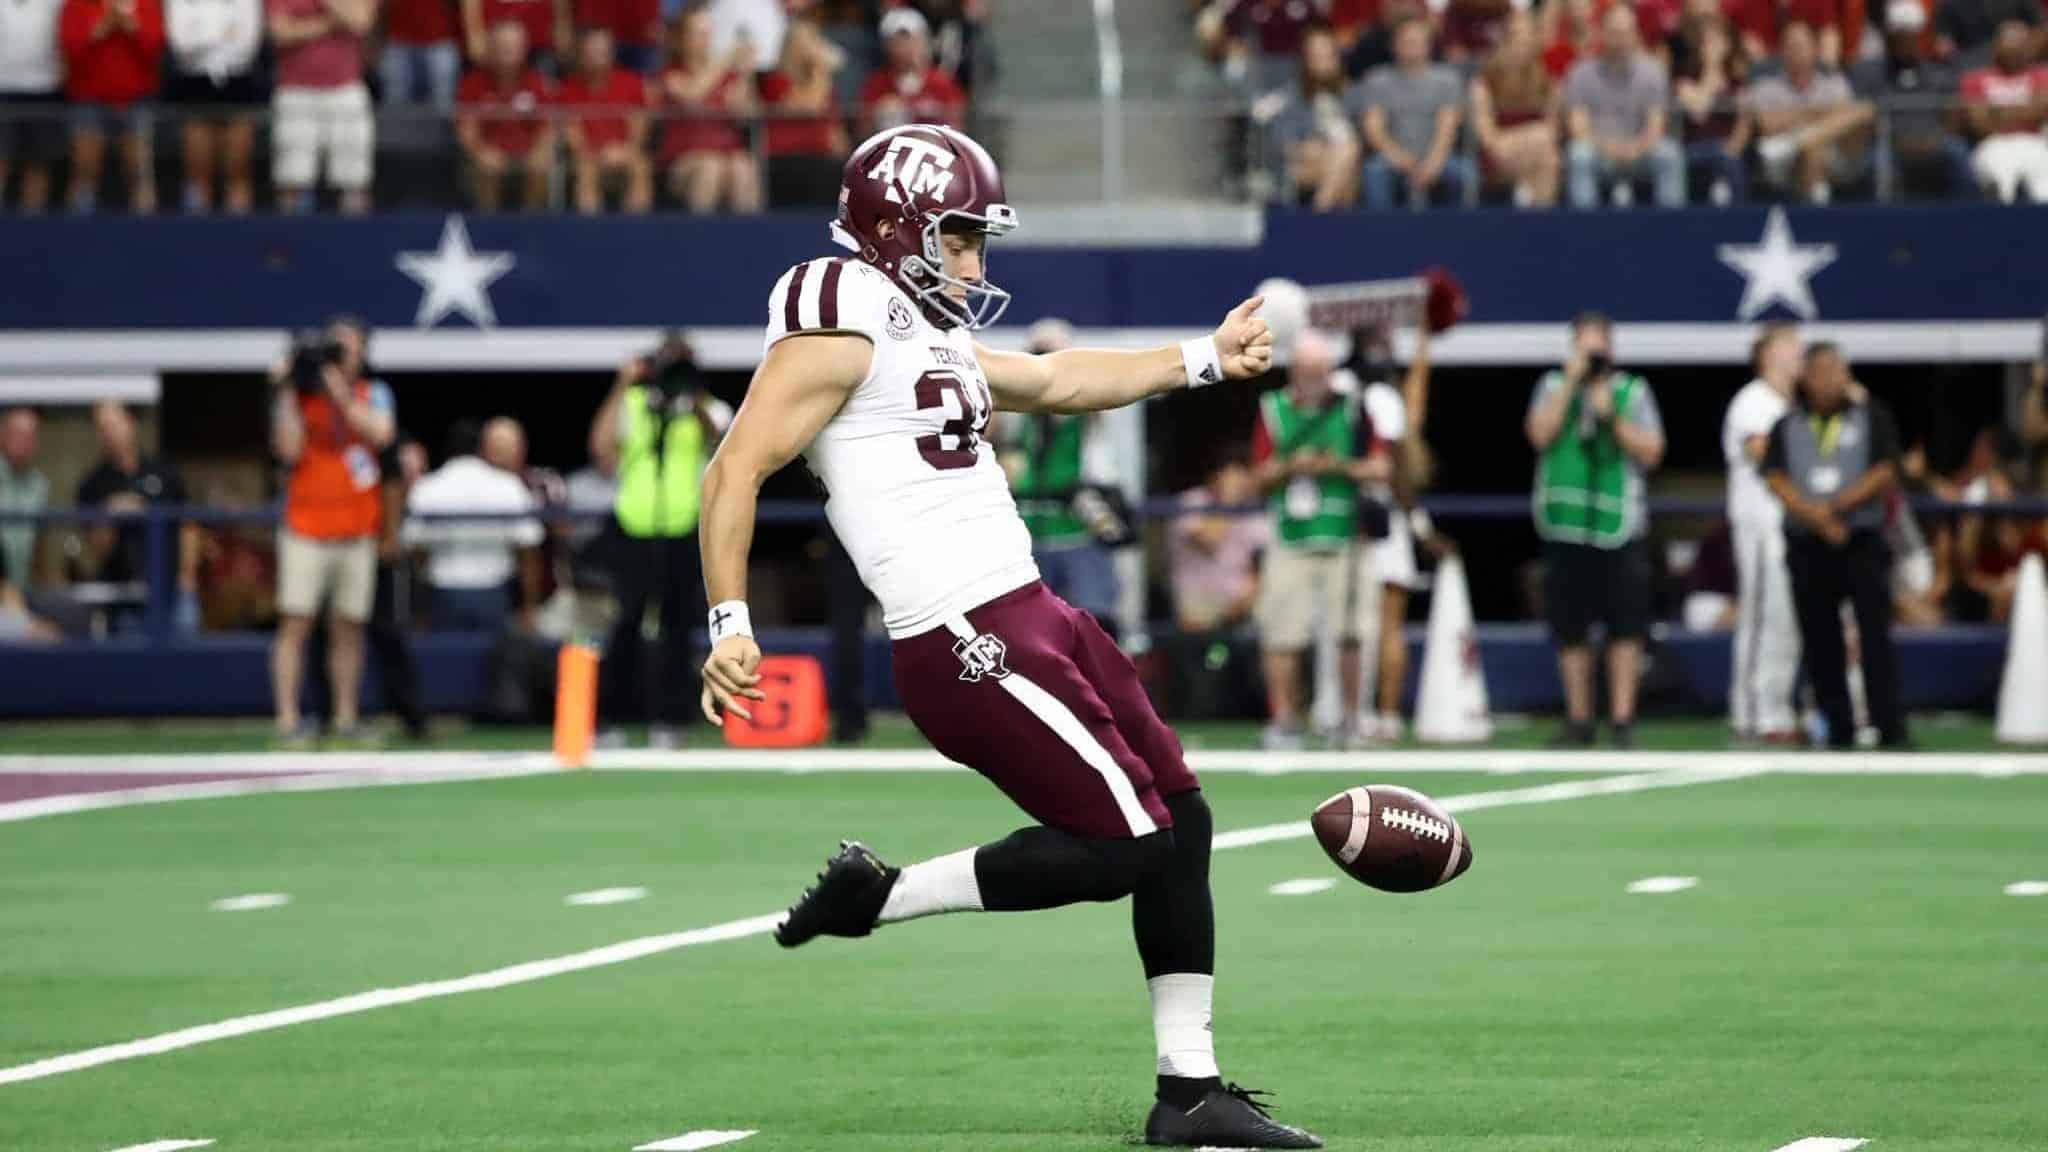 ARLINGTON, TEXAS - SEPTEMBER 28: Braden Mann #34 of the Texas A&M Aggies punts to the Arkansas Razorbacks in the second quarter during the Southwest Classic at AT&T Stadium on September 28, 2019 in Arlington, Texas. New York Jets